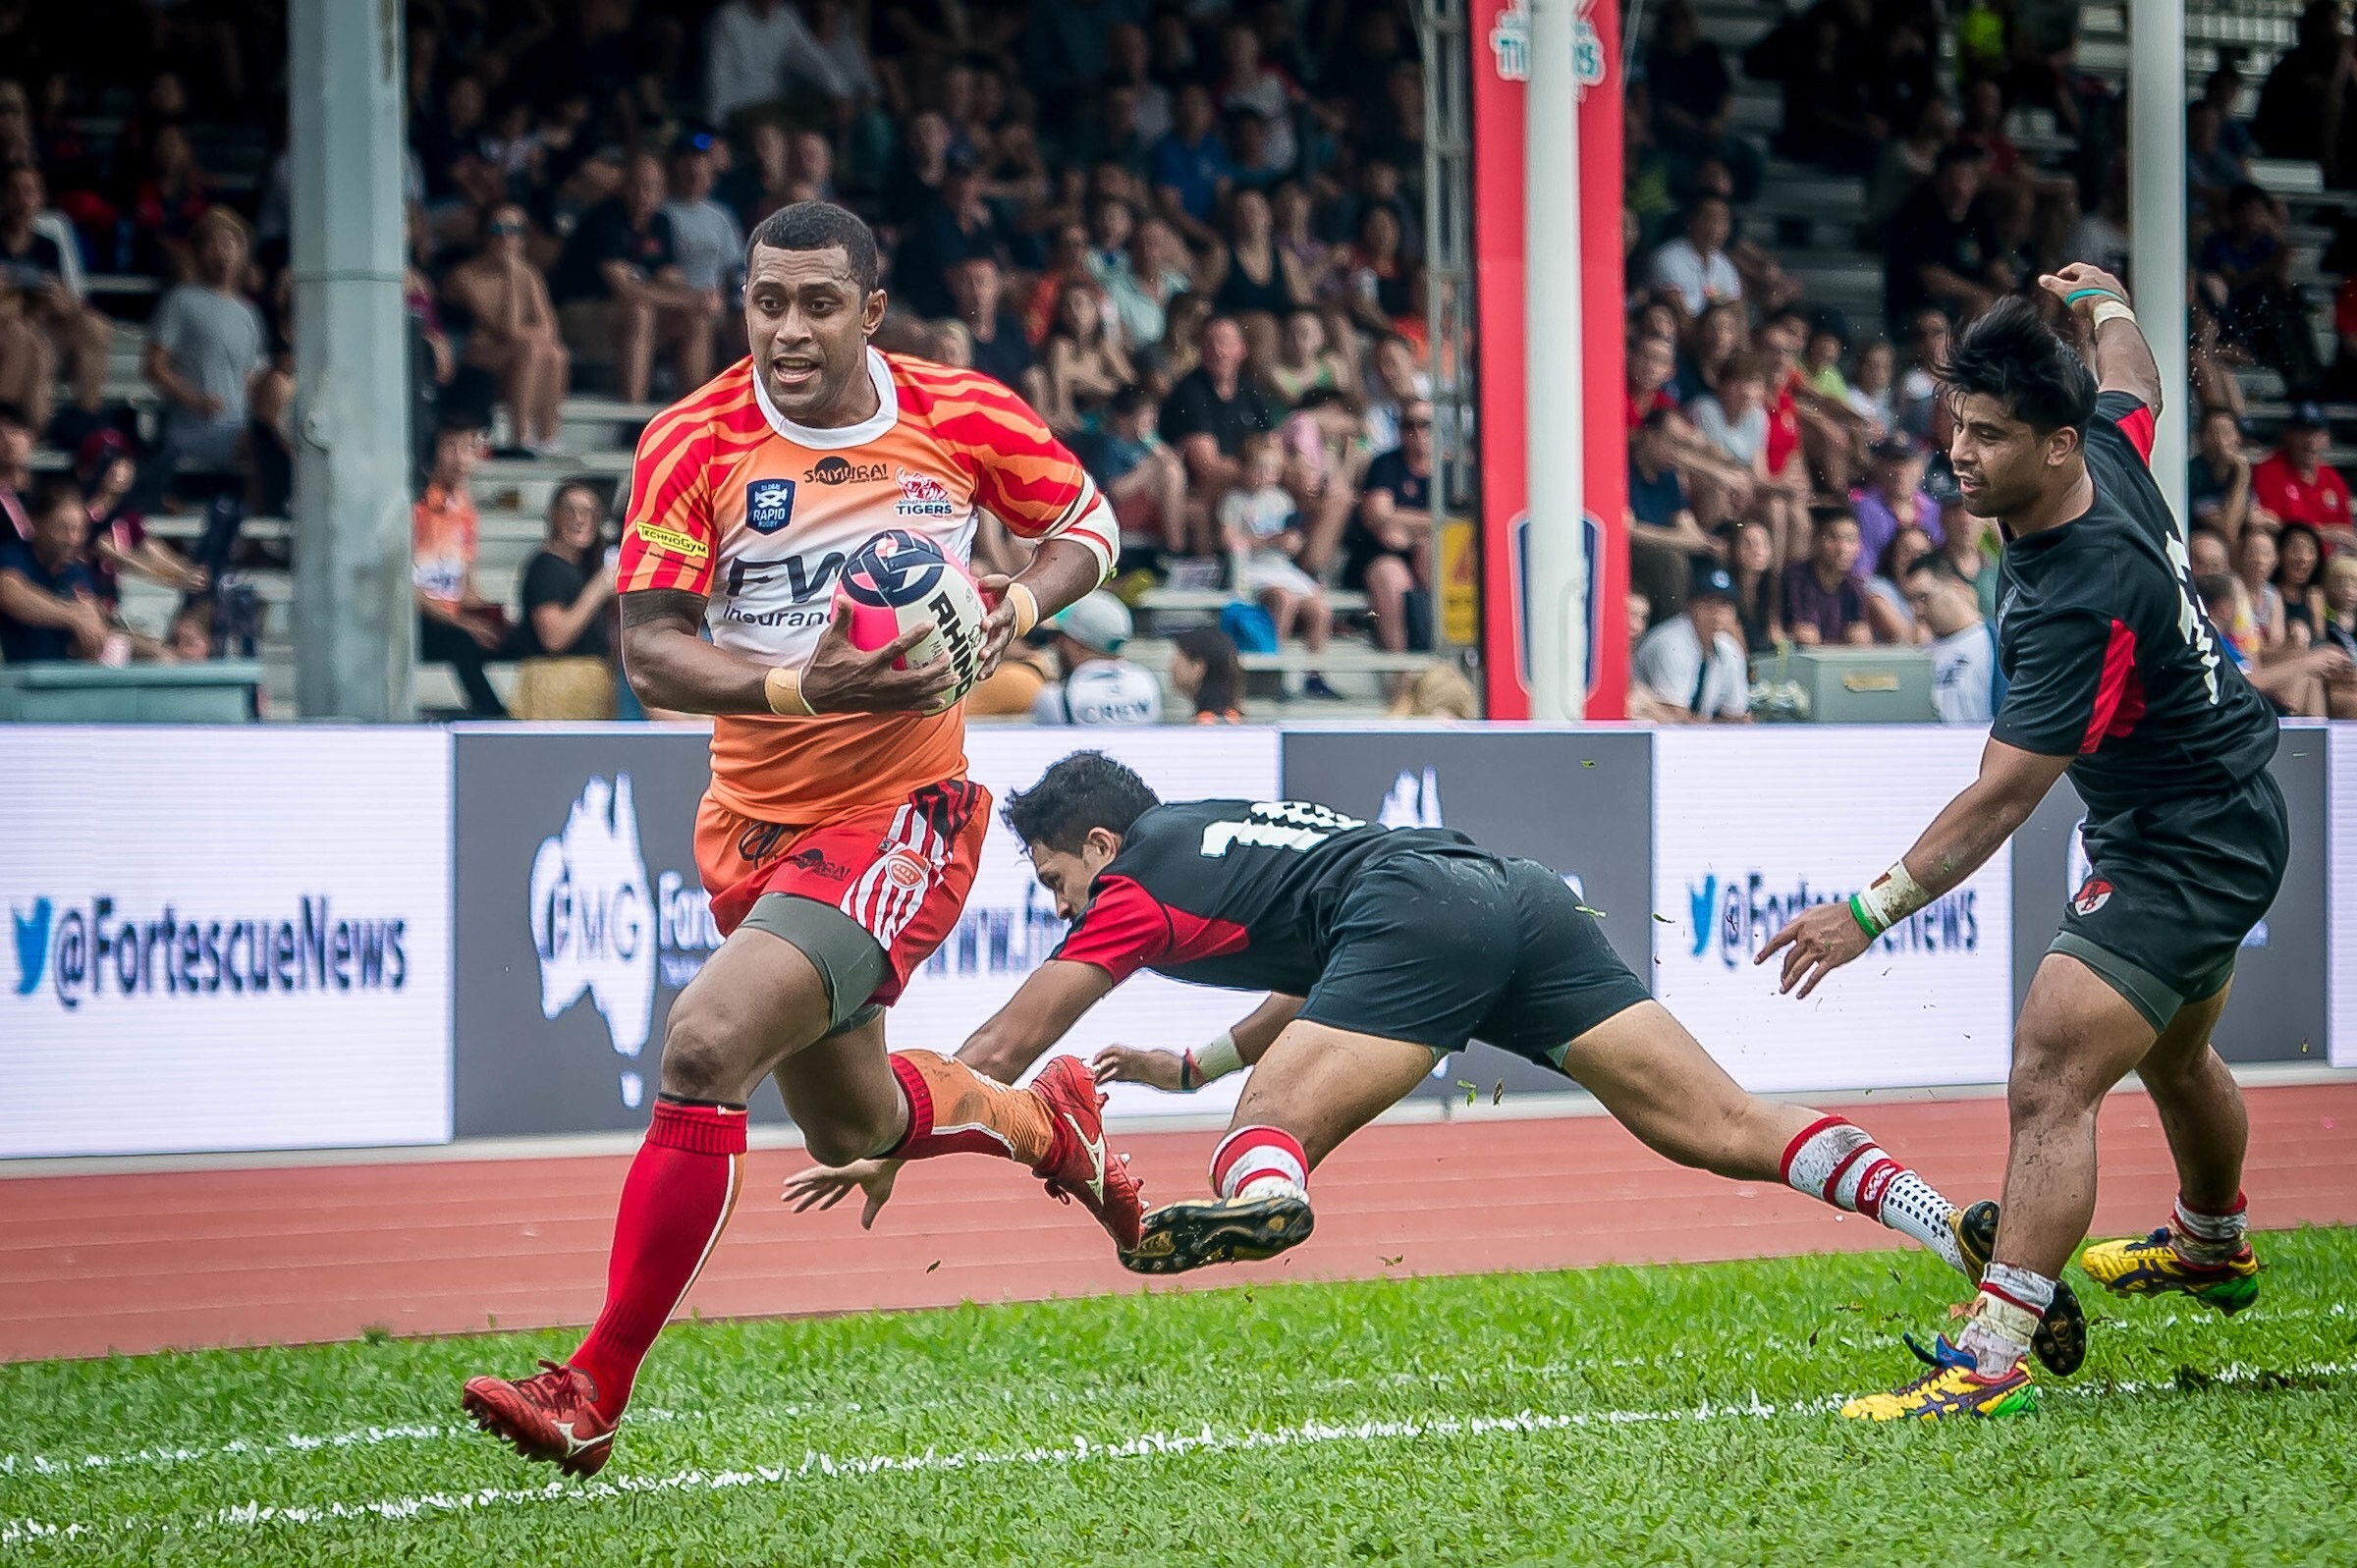 Hong Kong-based South China Tigers playing the Asia-Pacific Dragons in the Global Rapid Rugby 2019 season in Aberdeen Sports Ground. Photo: Ike Images